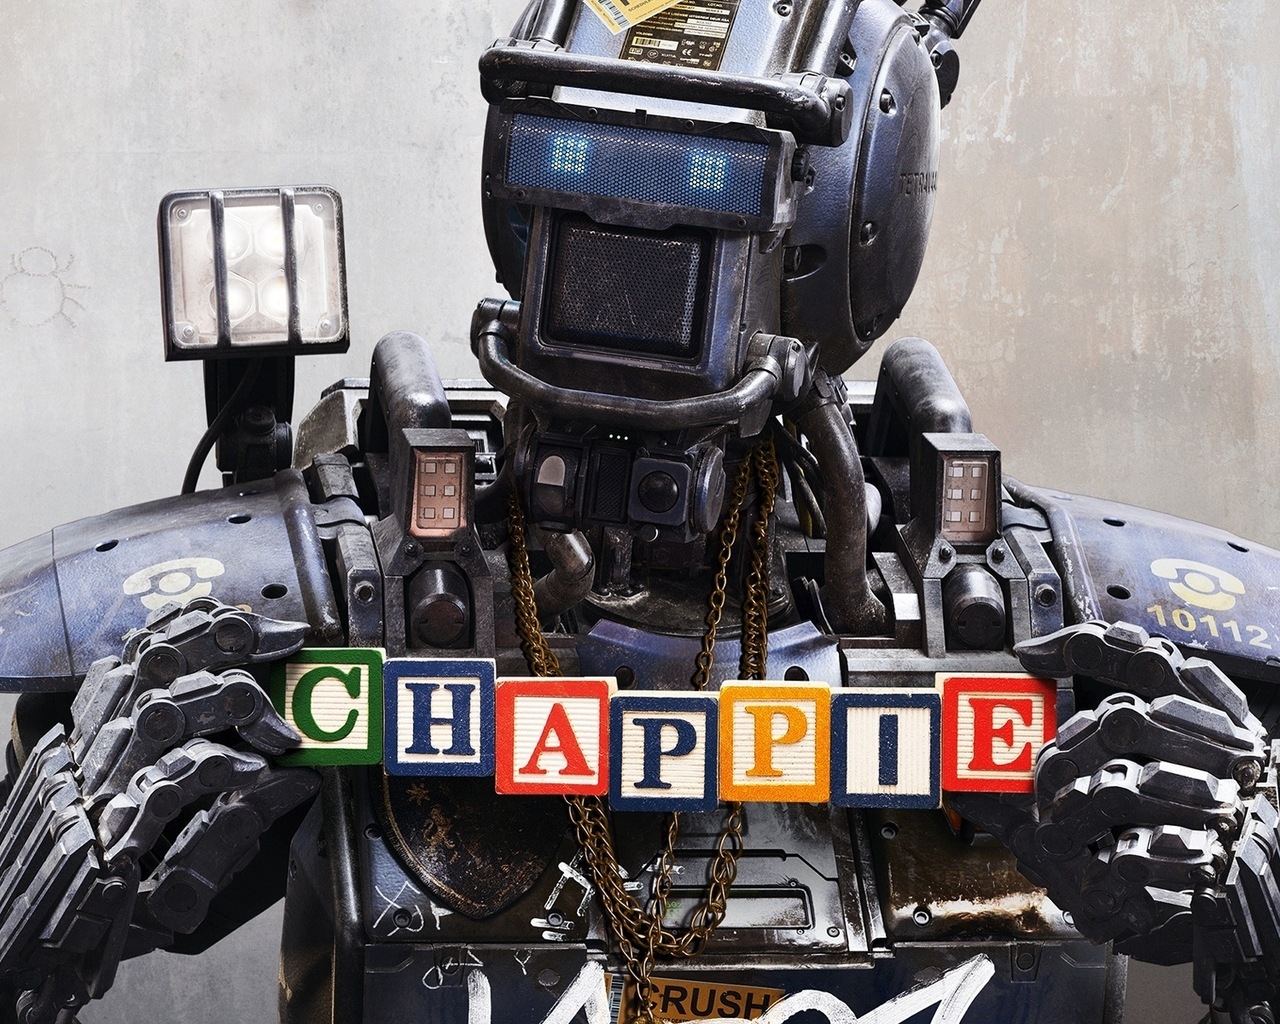 Chappie Robot for 1280 x 1024 resolution